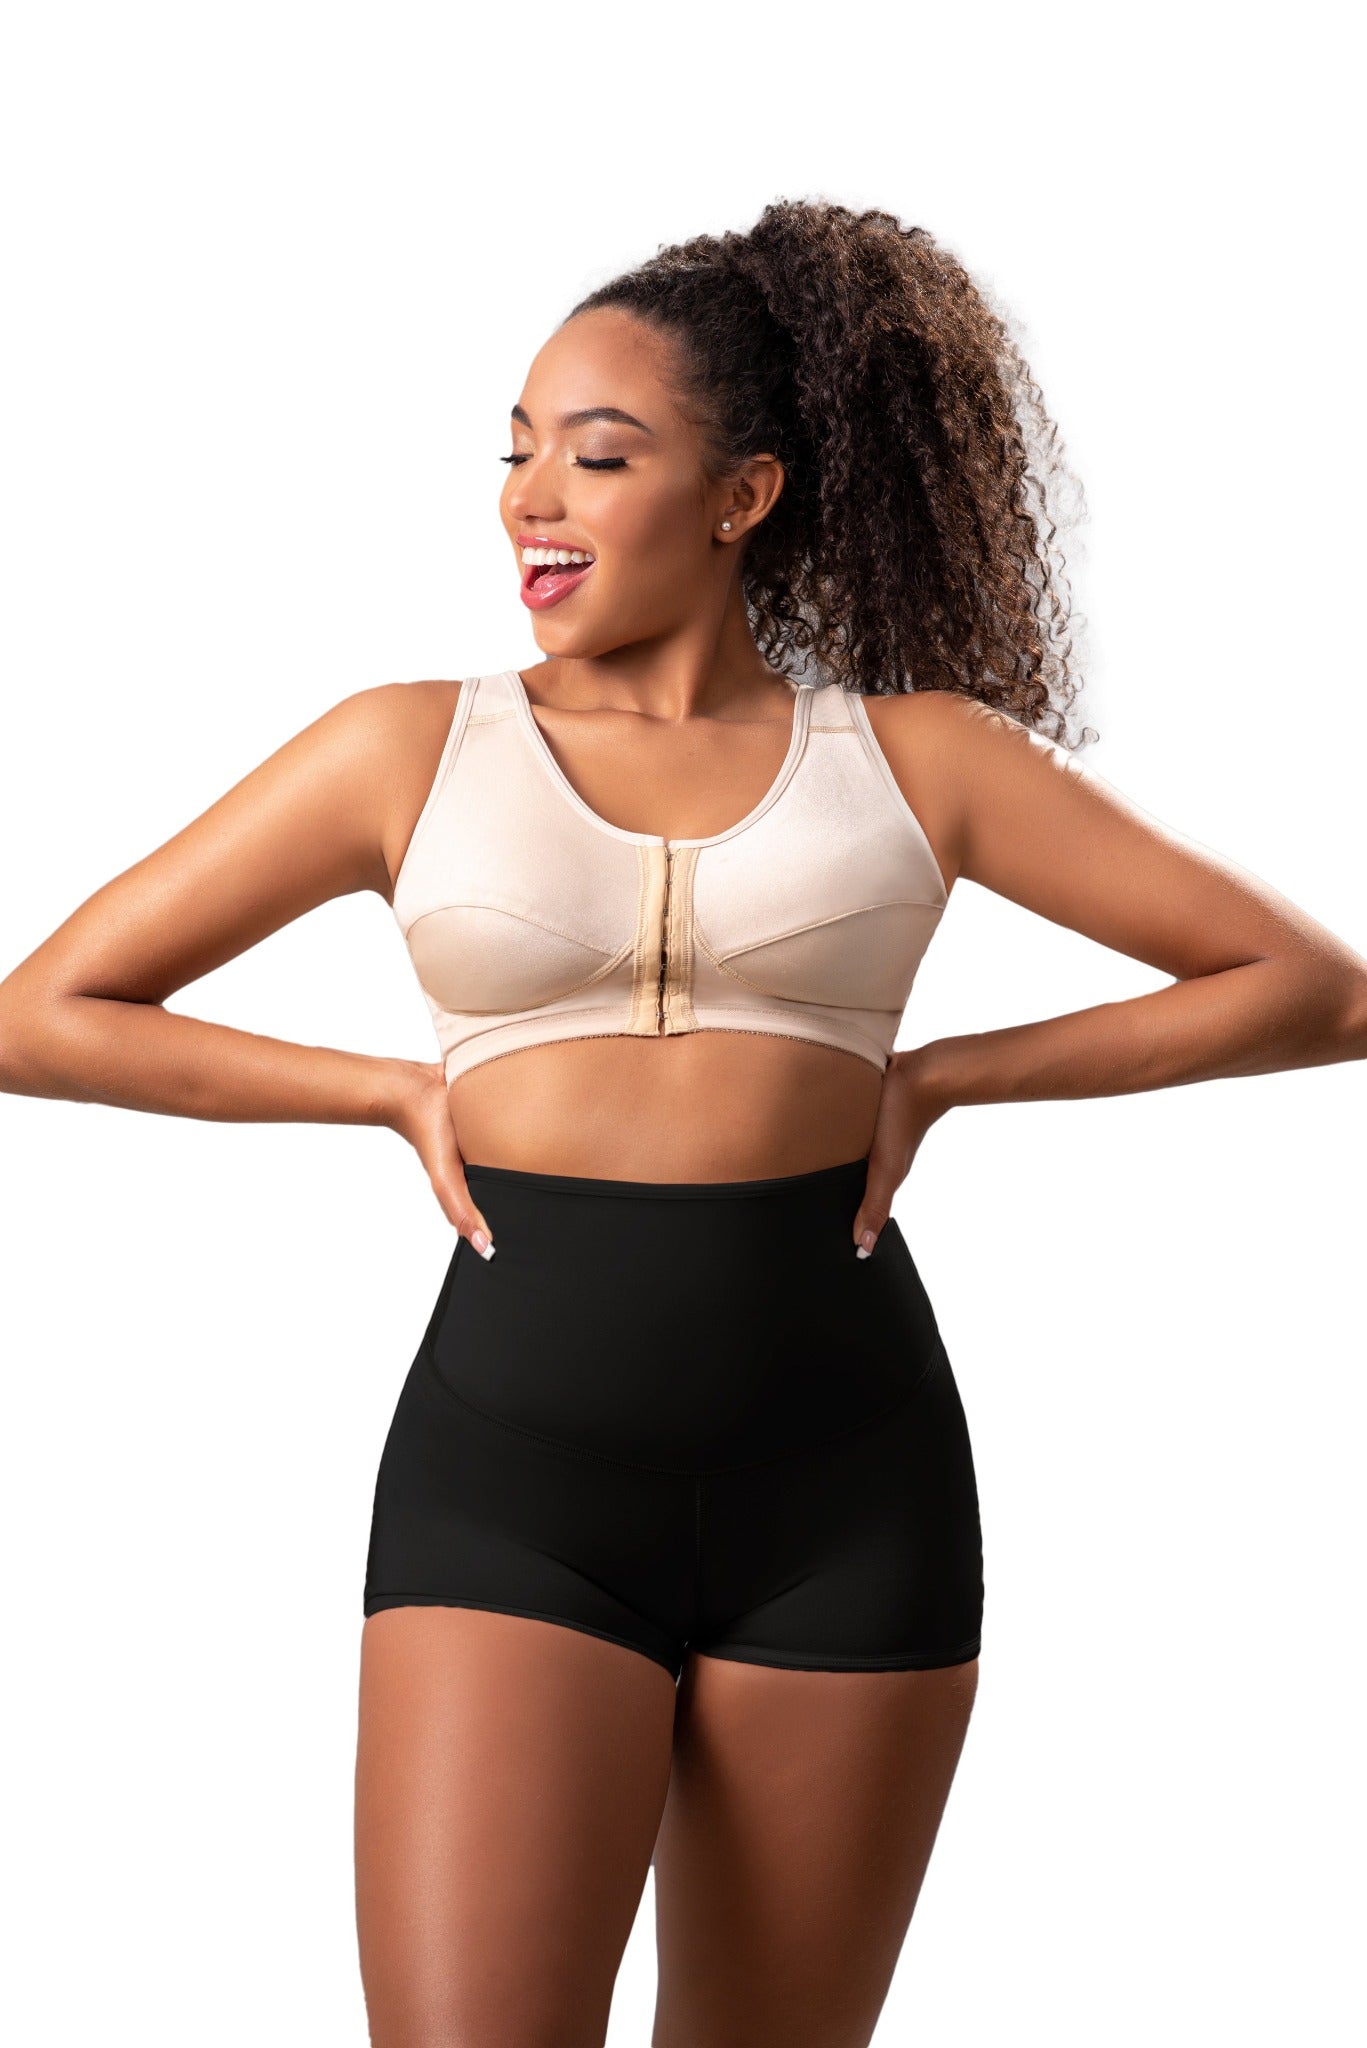 KELLYLEE Butt Lifter Panties Tummy Control Shapewear Shorts for